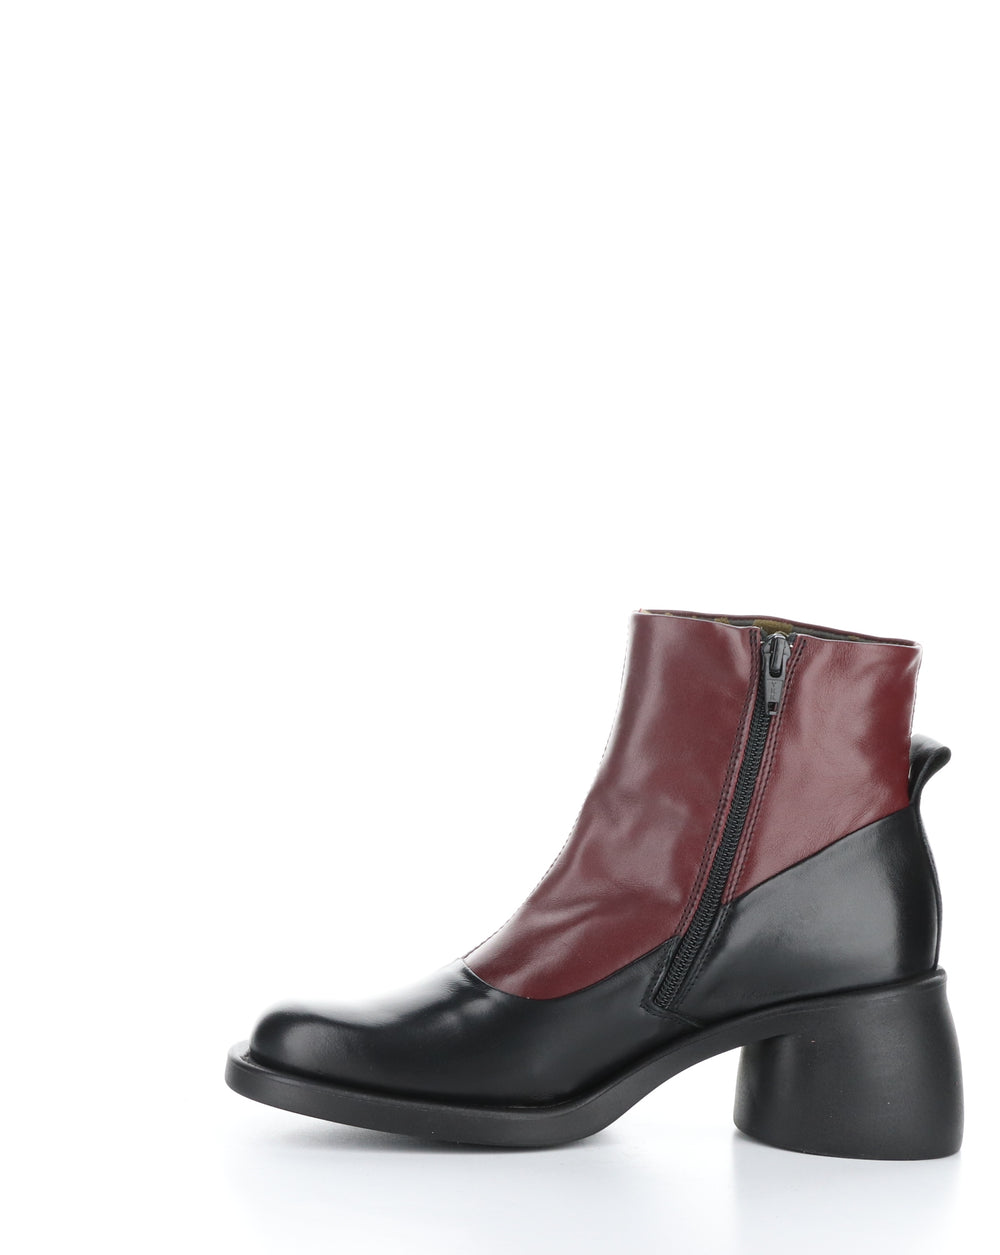 HINT003FLY 002 BLACK/WINE Round Toe Boots